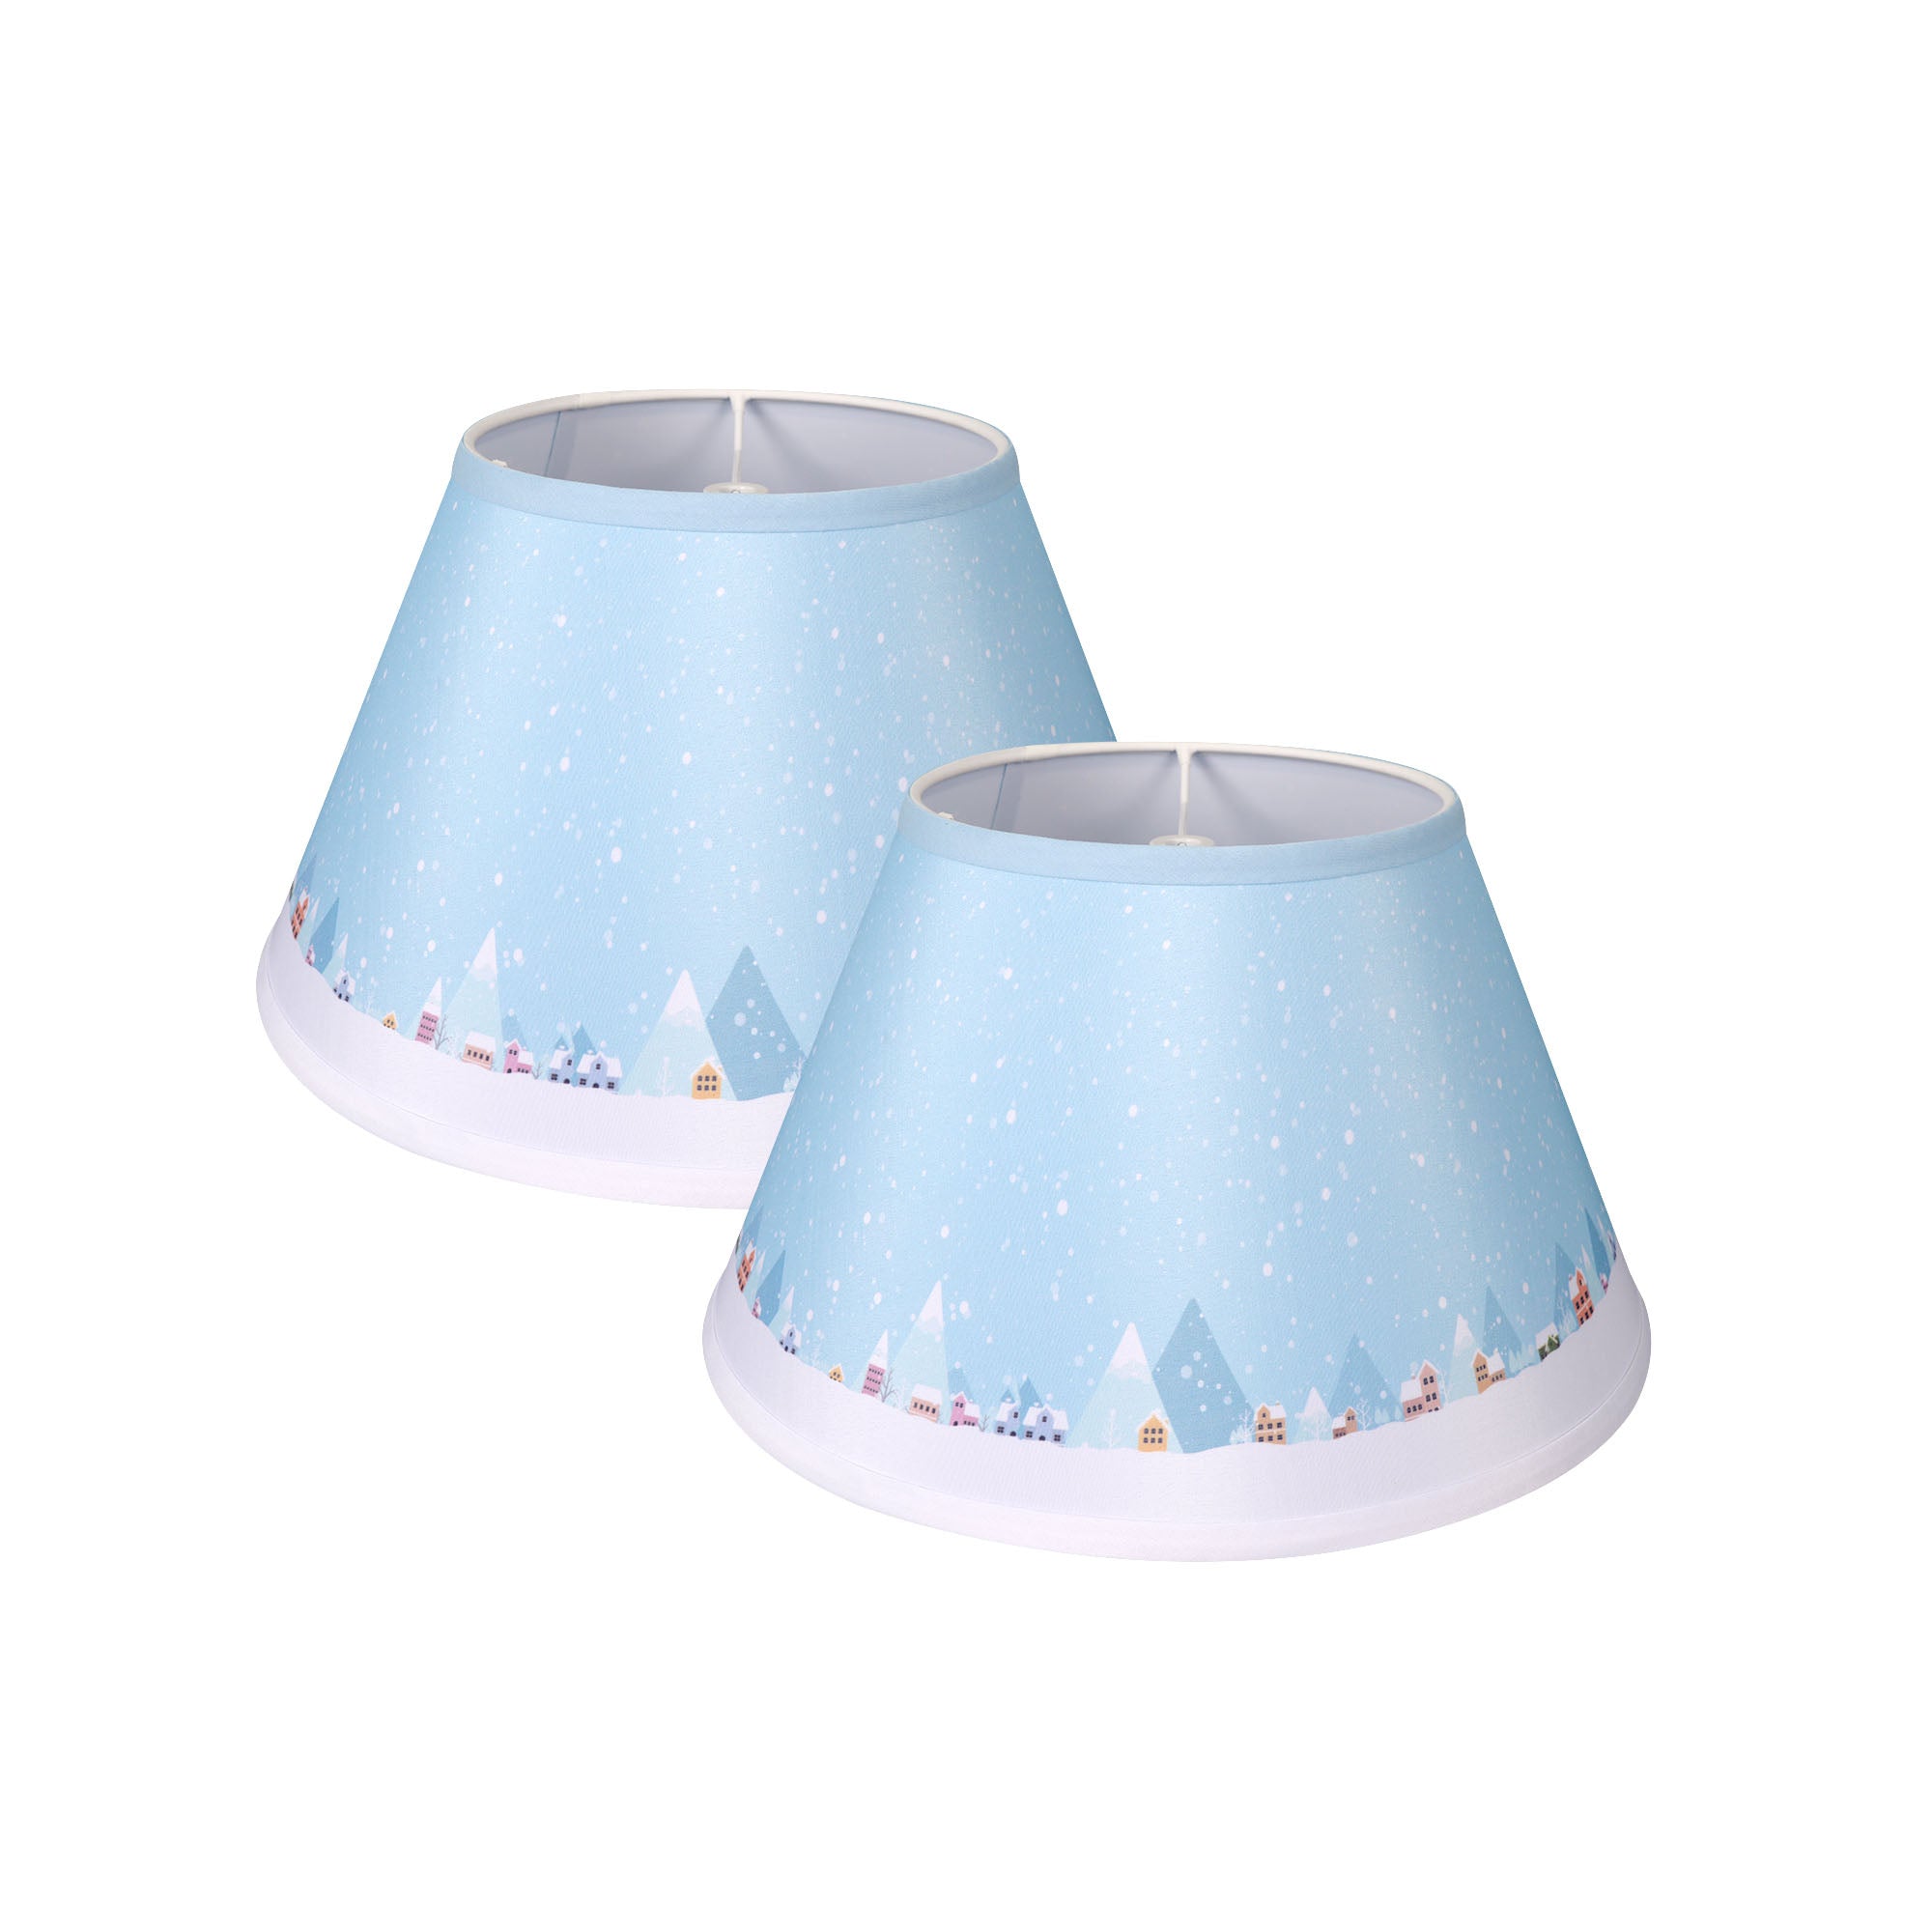 Carro Home Winter Collection Limited Edition Round Empire Shape Lamp Shade 7&quot;x13&quot;x7.8&quot; – Snowy Village (Set of 2) 